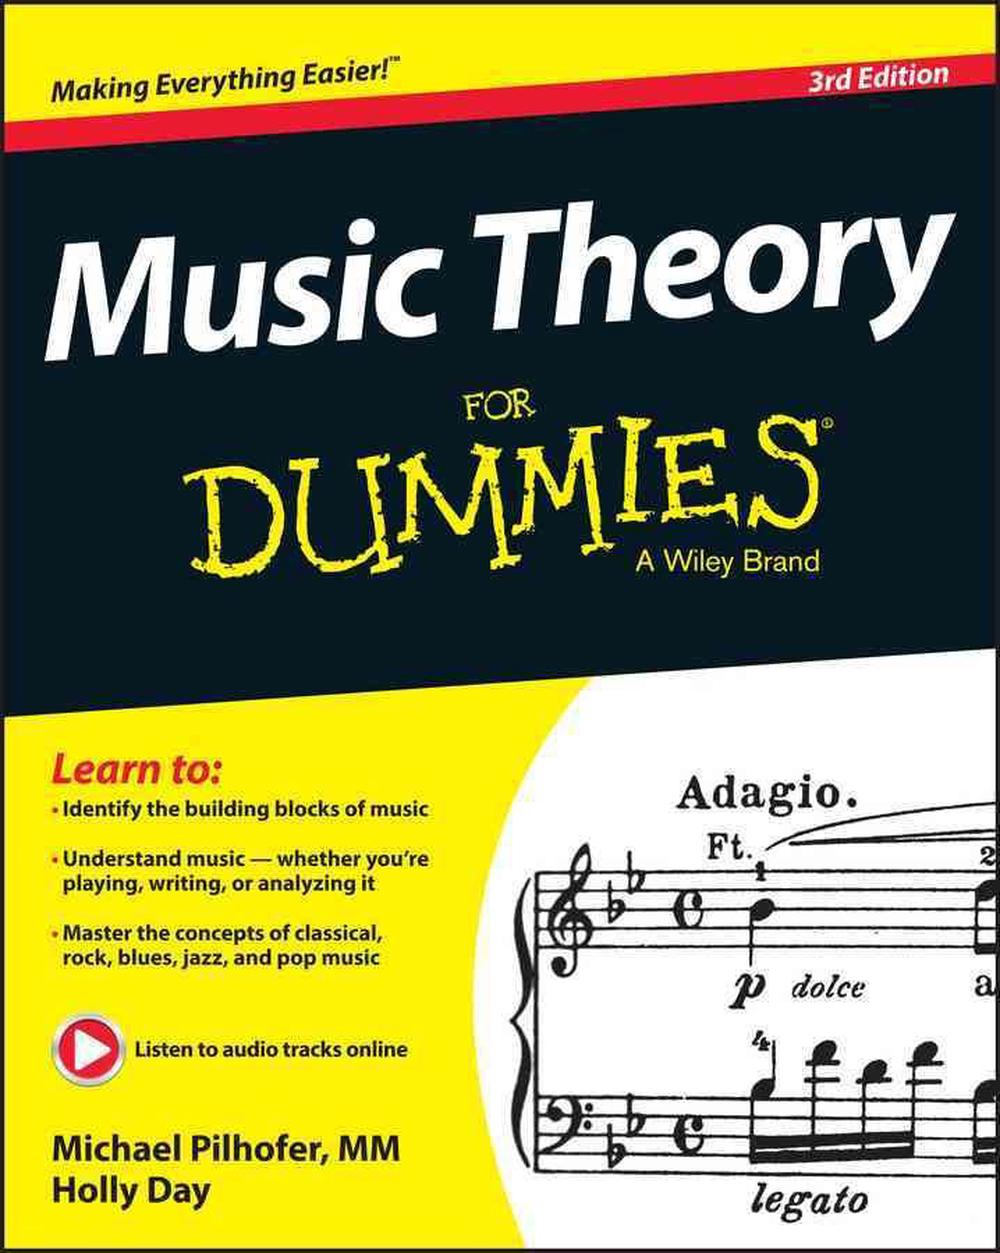 Music Theory for Dummies by Michael Pilhofer, Paperback, 9781118990940